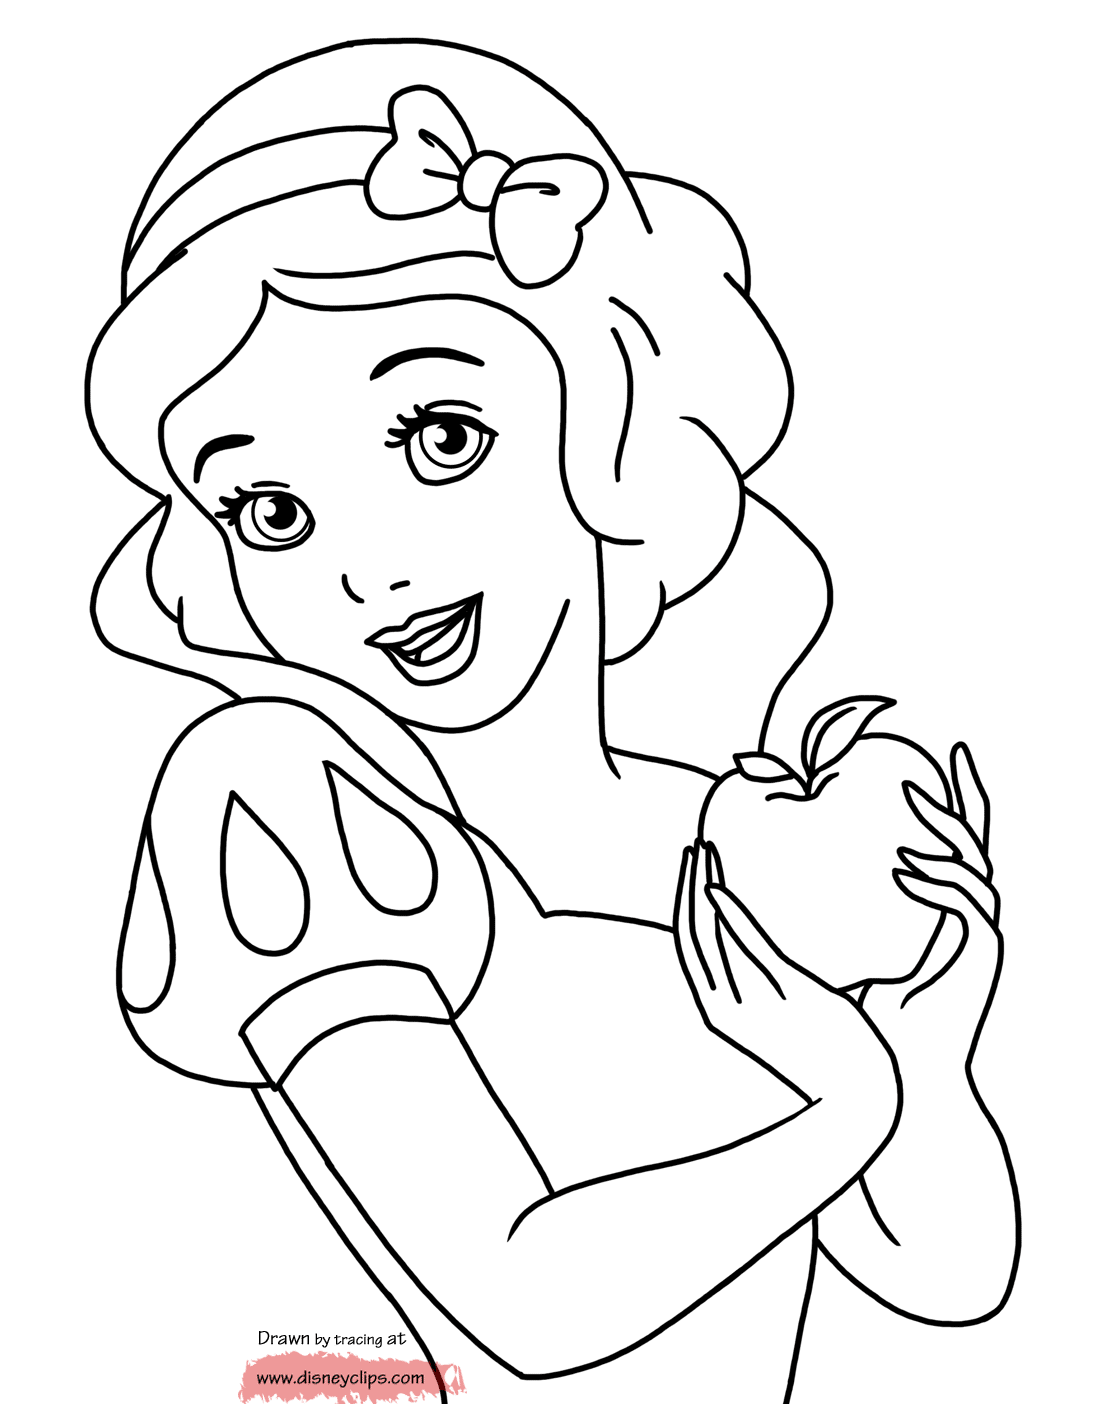 Disney Snow White Coloring Pages | Thousand of the Best printable